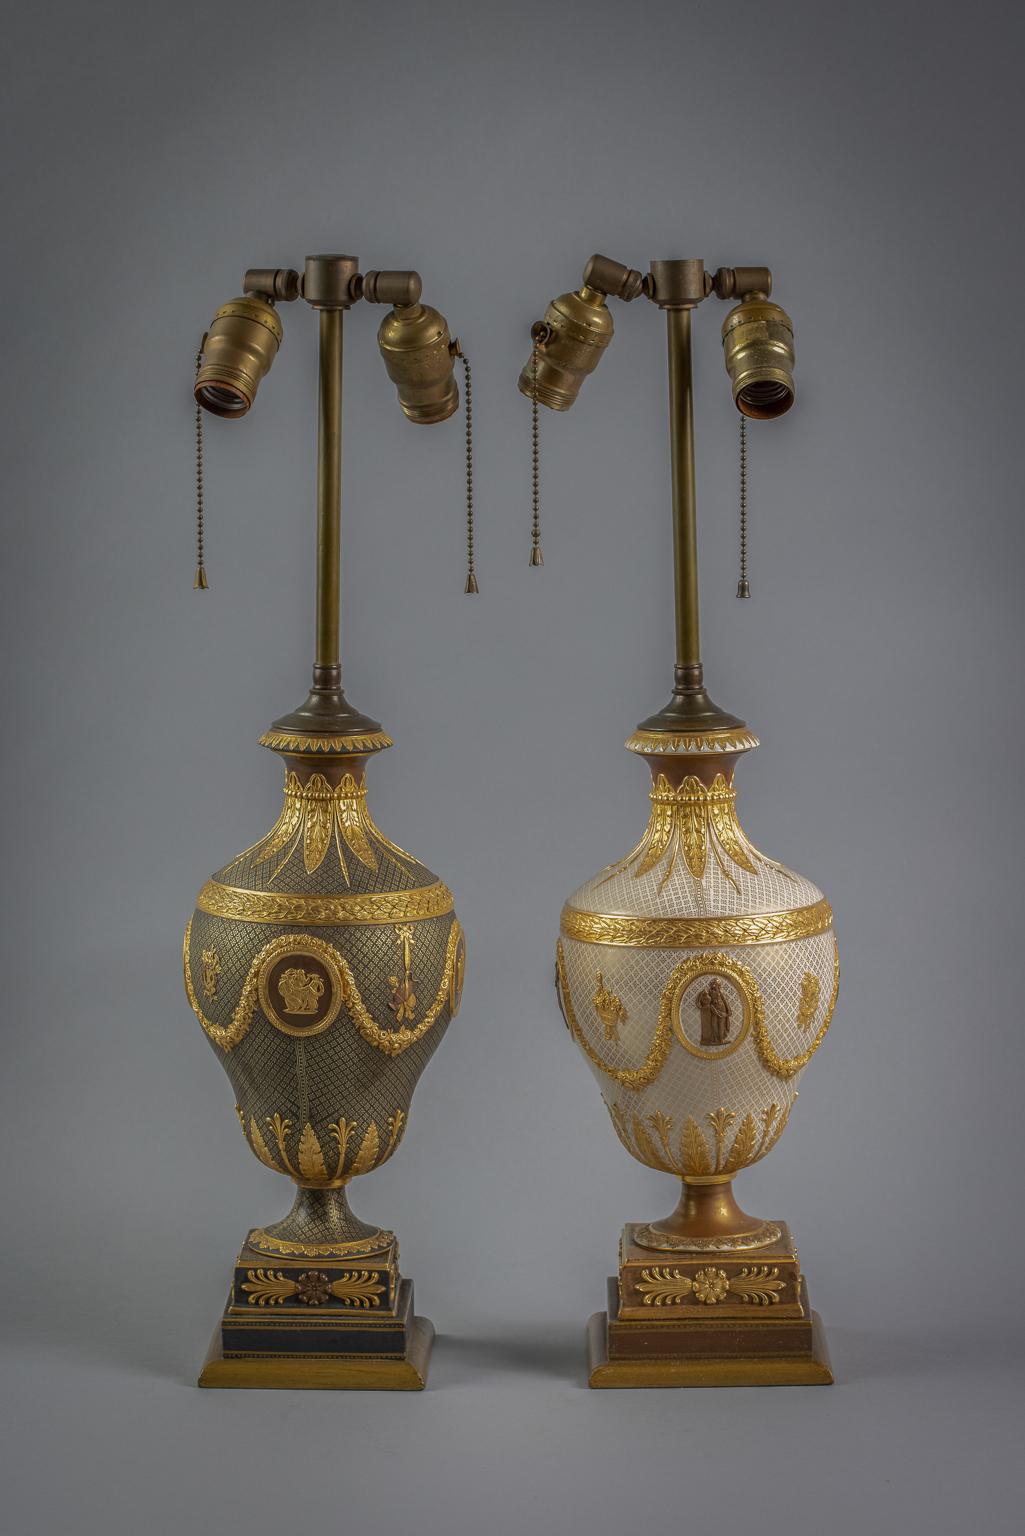 Mounted as a lamp, of ovoid form, decorated with oval medallions depicting classical figures on a gilt decorated cream ground, hung with floral garland continuing to a flared neck and removable lid, raised on a socle and ending on a square base.